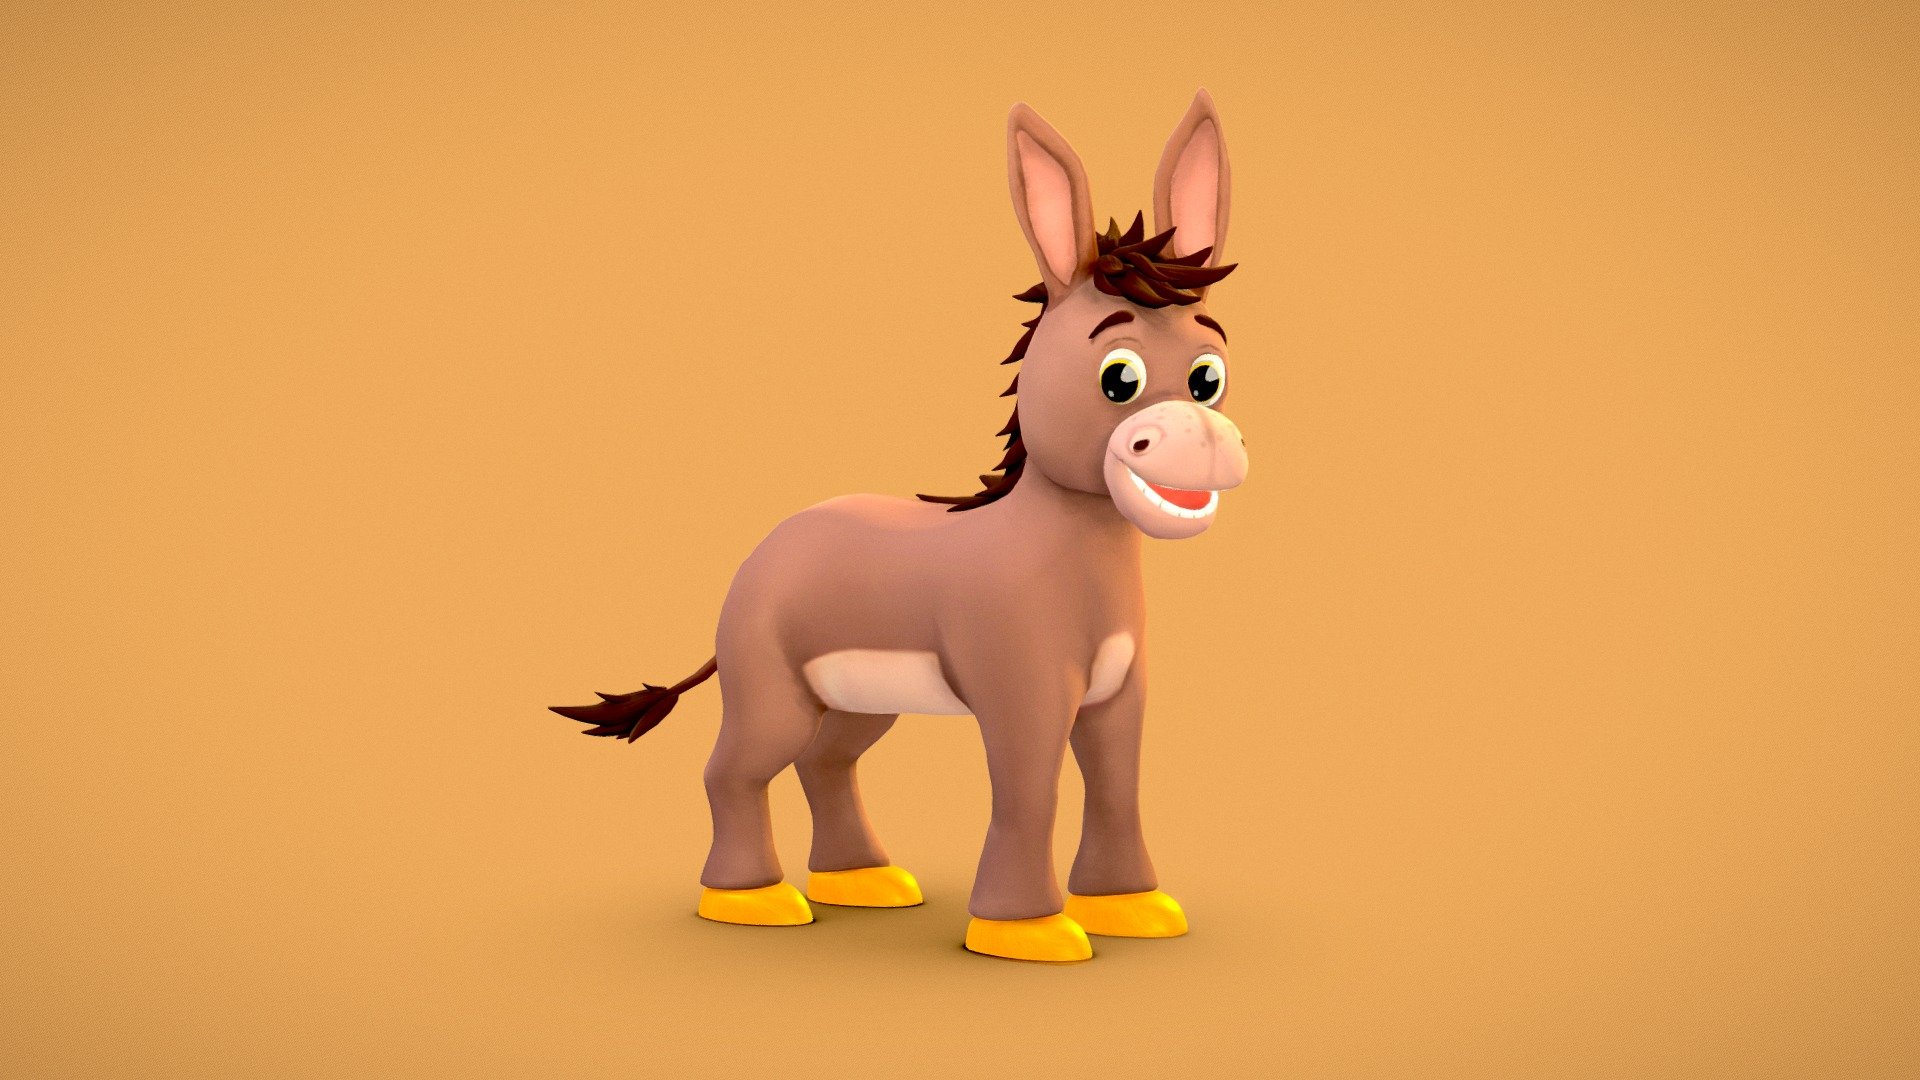 Donkey
Modeling with Maya
Texturing with Substance Painter - Donkey - 3D model by Melissa Descubes (@Melissadescubes) 3d model